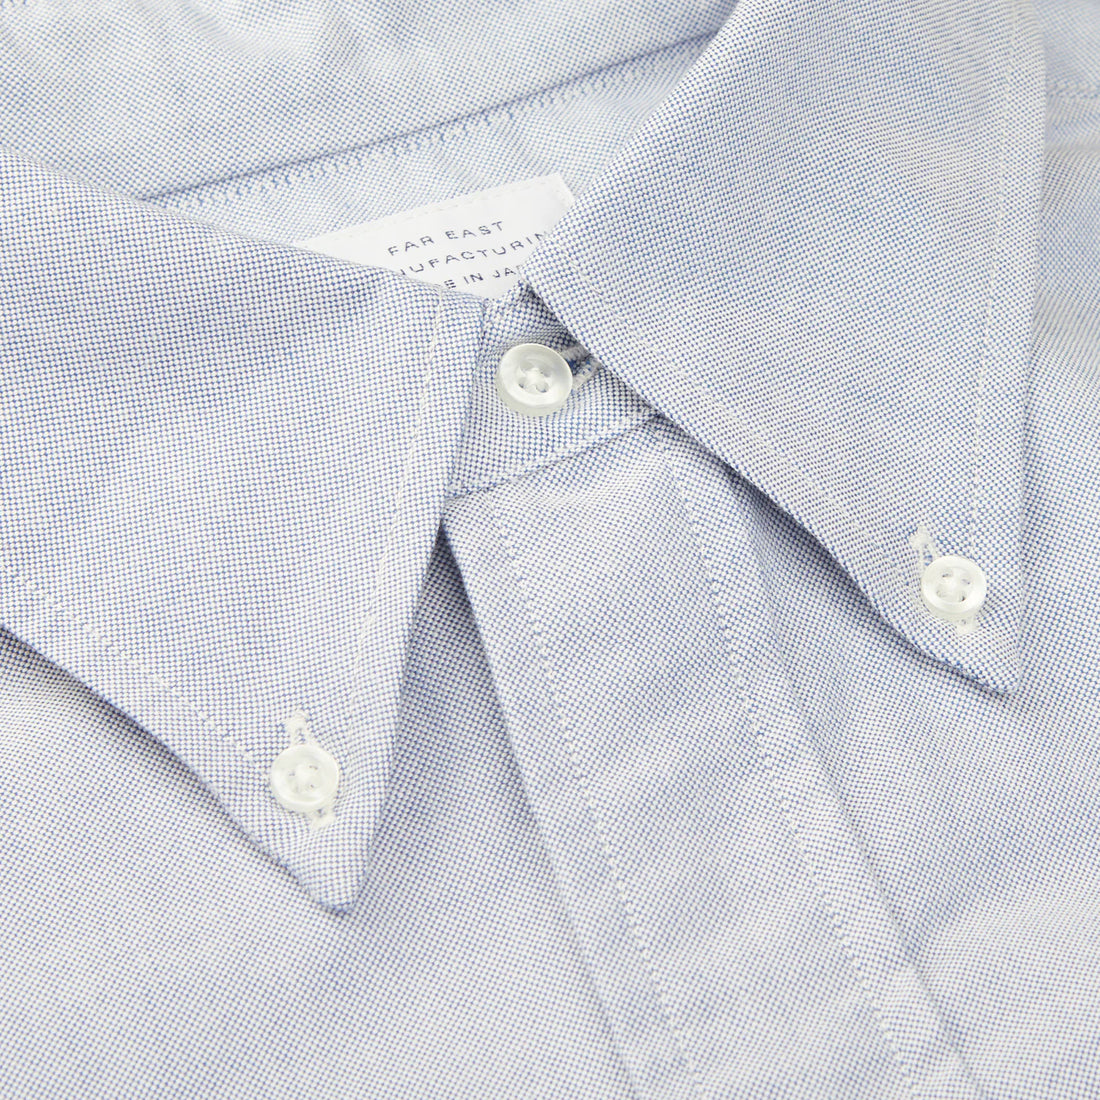 Close-up of a light blue button-up shirt with a focus on the collar and top button.